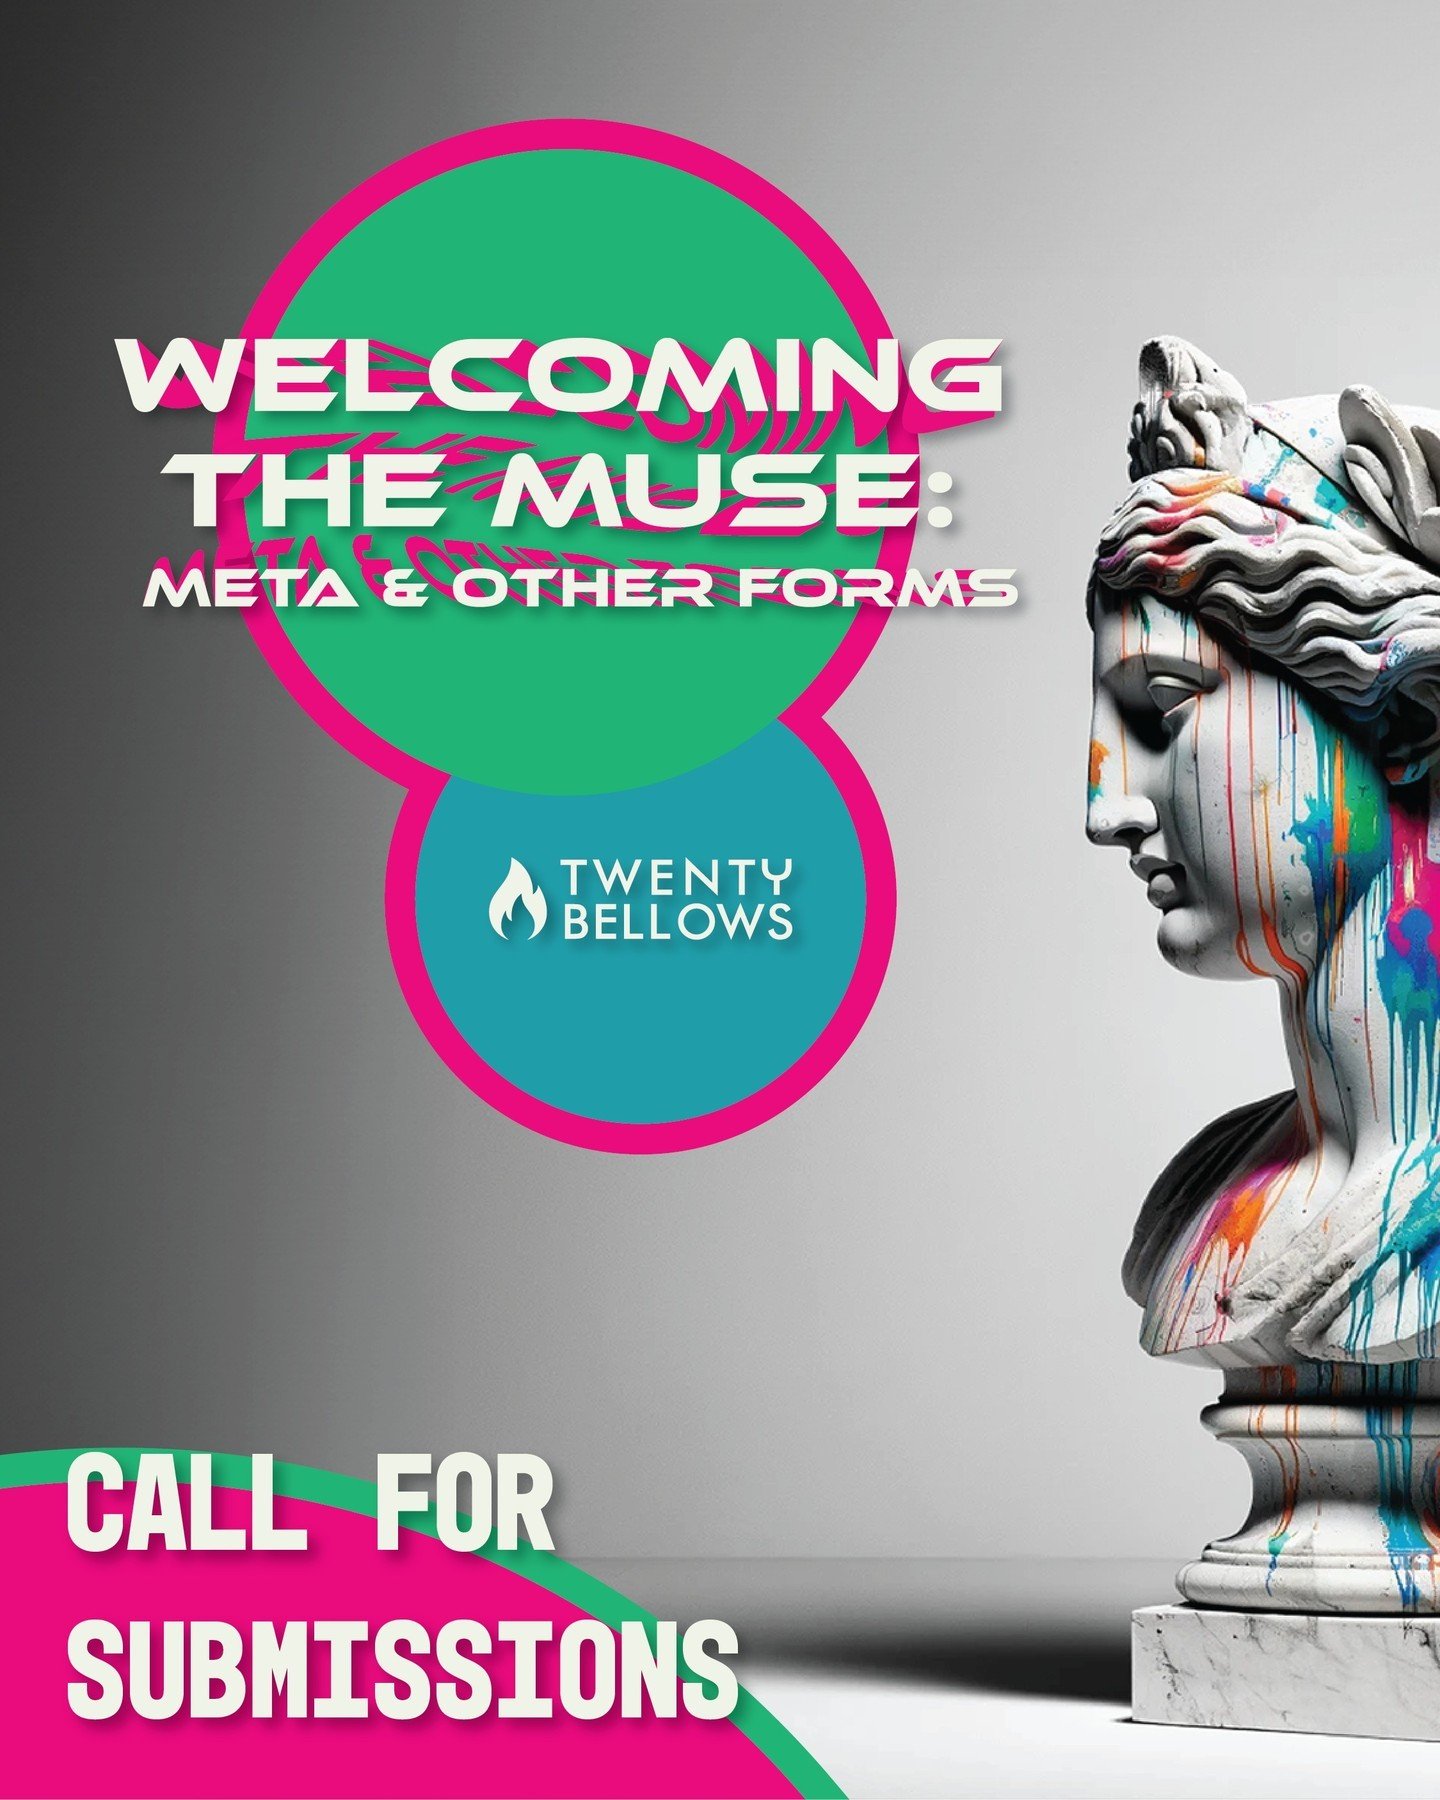 #CallForSubmissions: Twenty Bellows is going meta! Submissions are now open for our next print anthology, &quot;Welcoming the Muse: Meta and Other Forms.&quot; This collection will pull the curtain back on the life creative &mdash; showcasing the myr